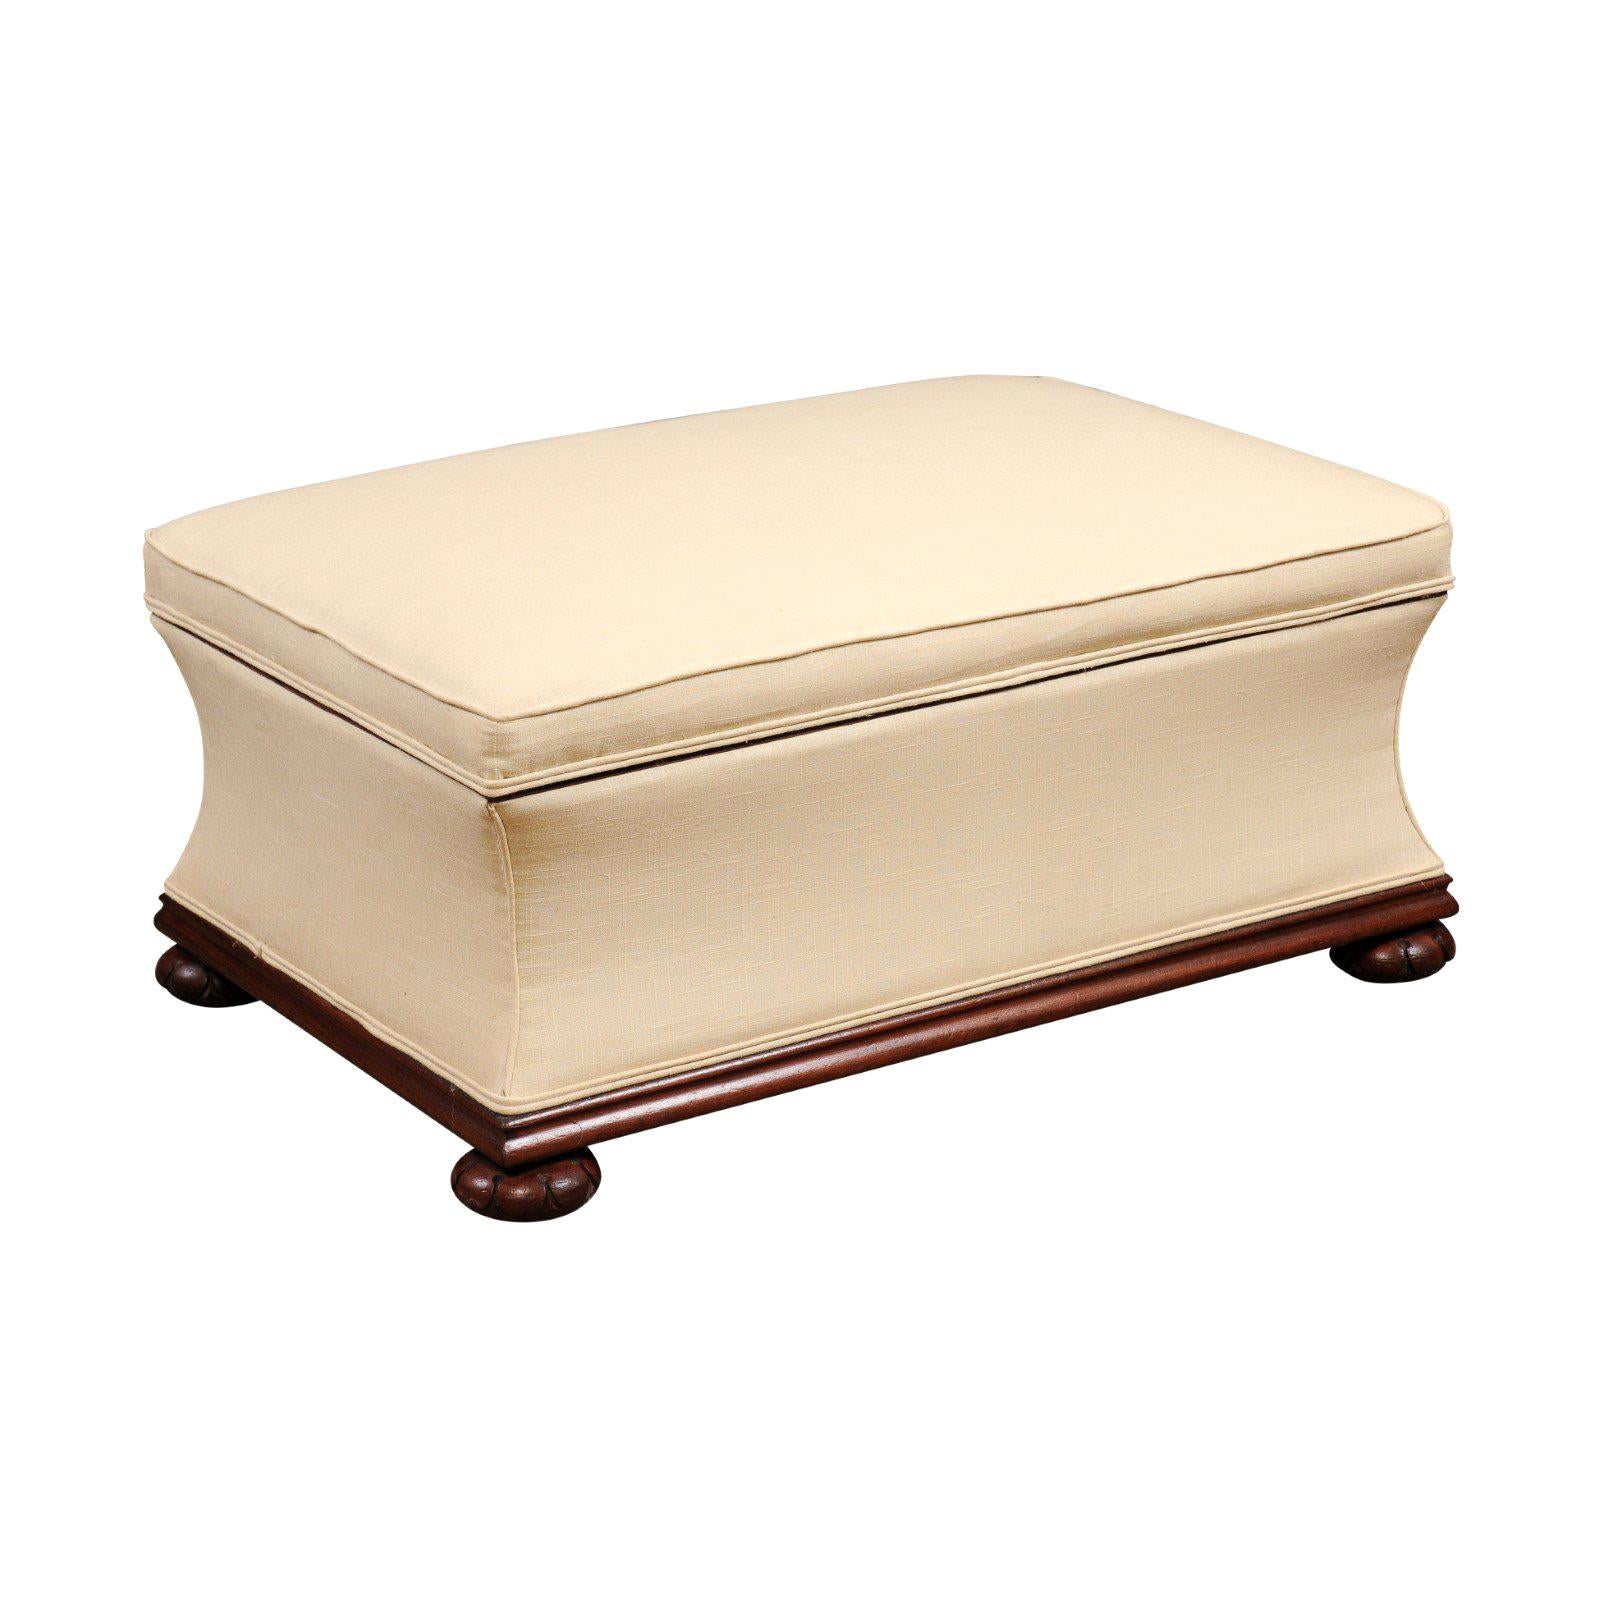  English Upholstered Linen and Mahogany Lift Top Ottoman, Late 19th Century